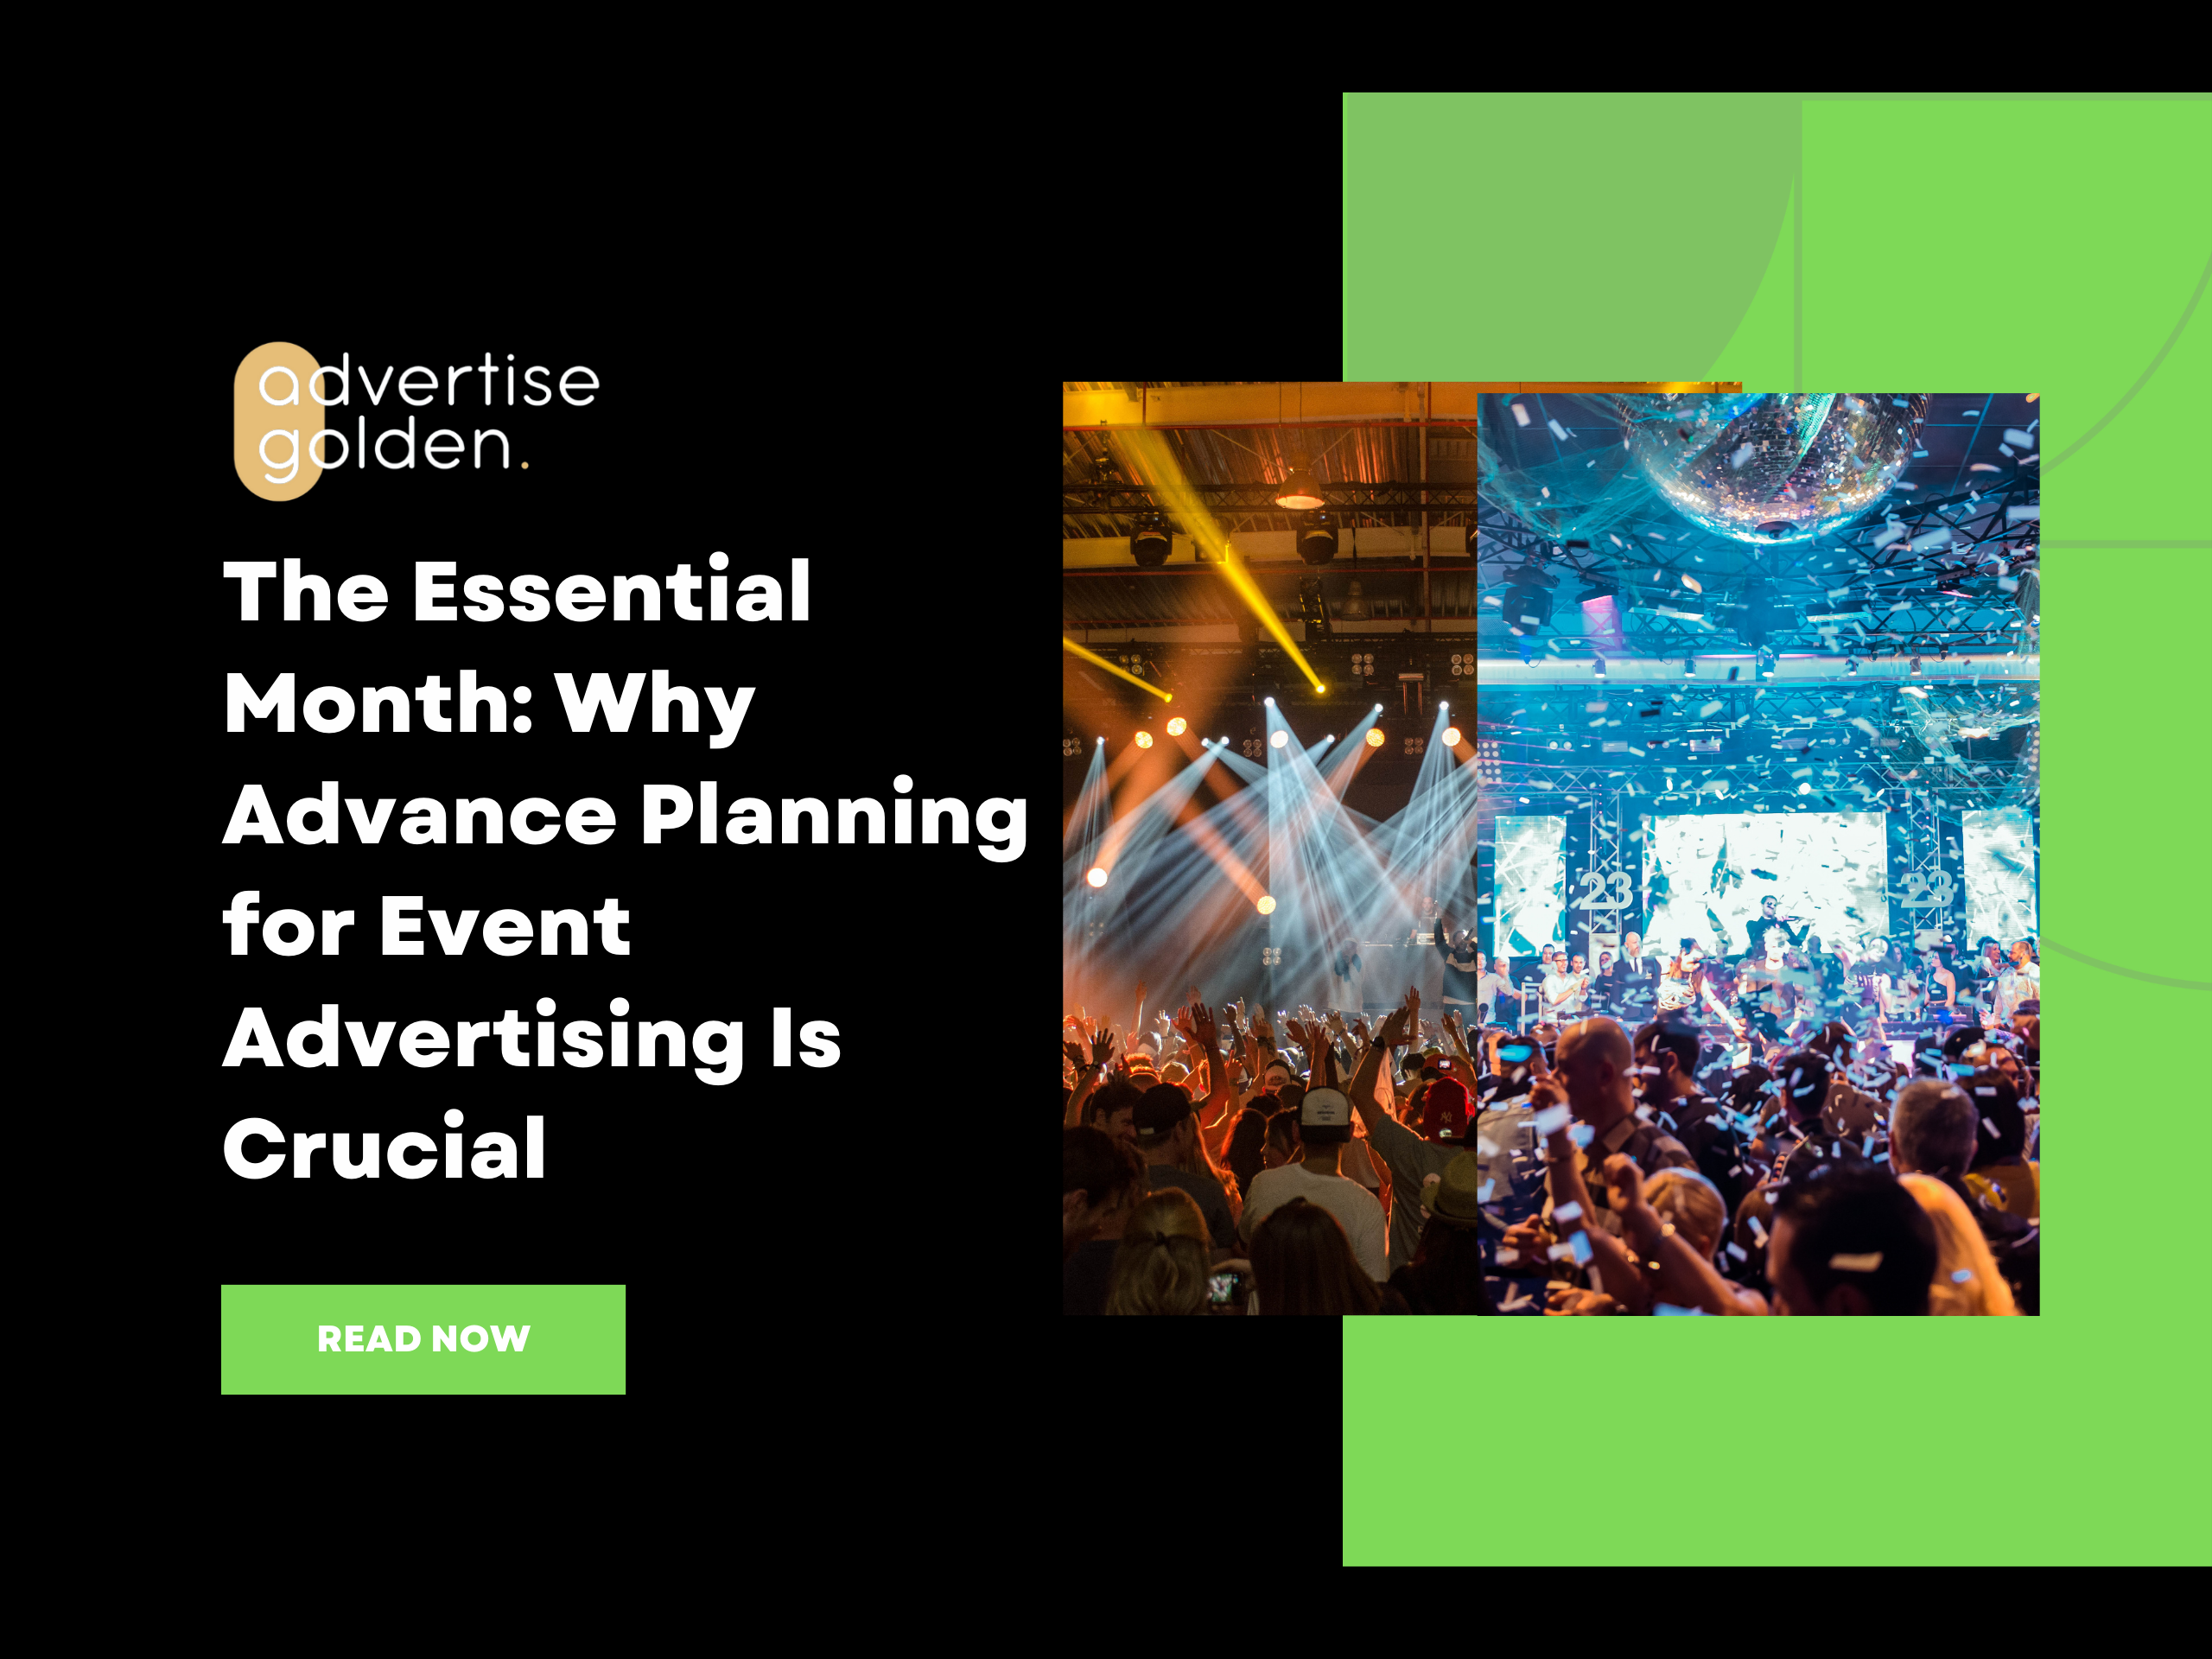 The Essential Month: Why Advance Planning for Event Advertising Is Crucial